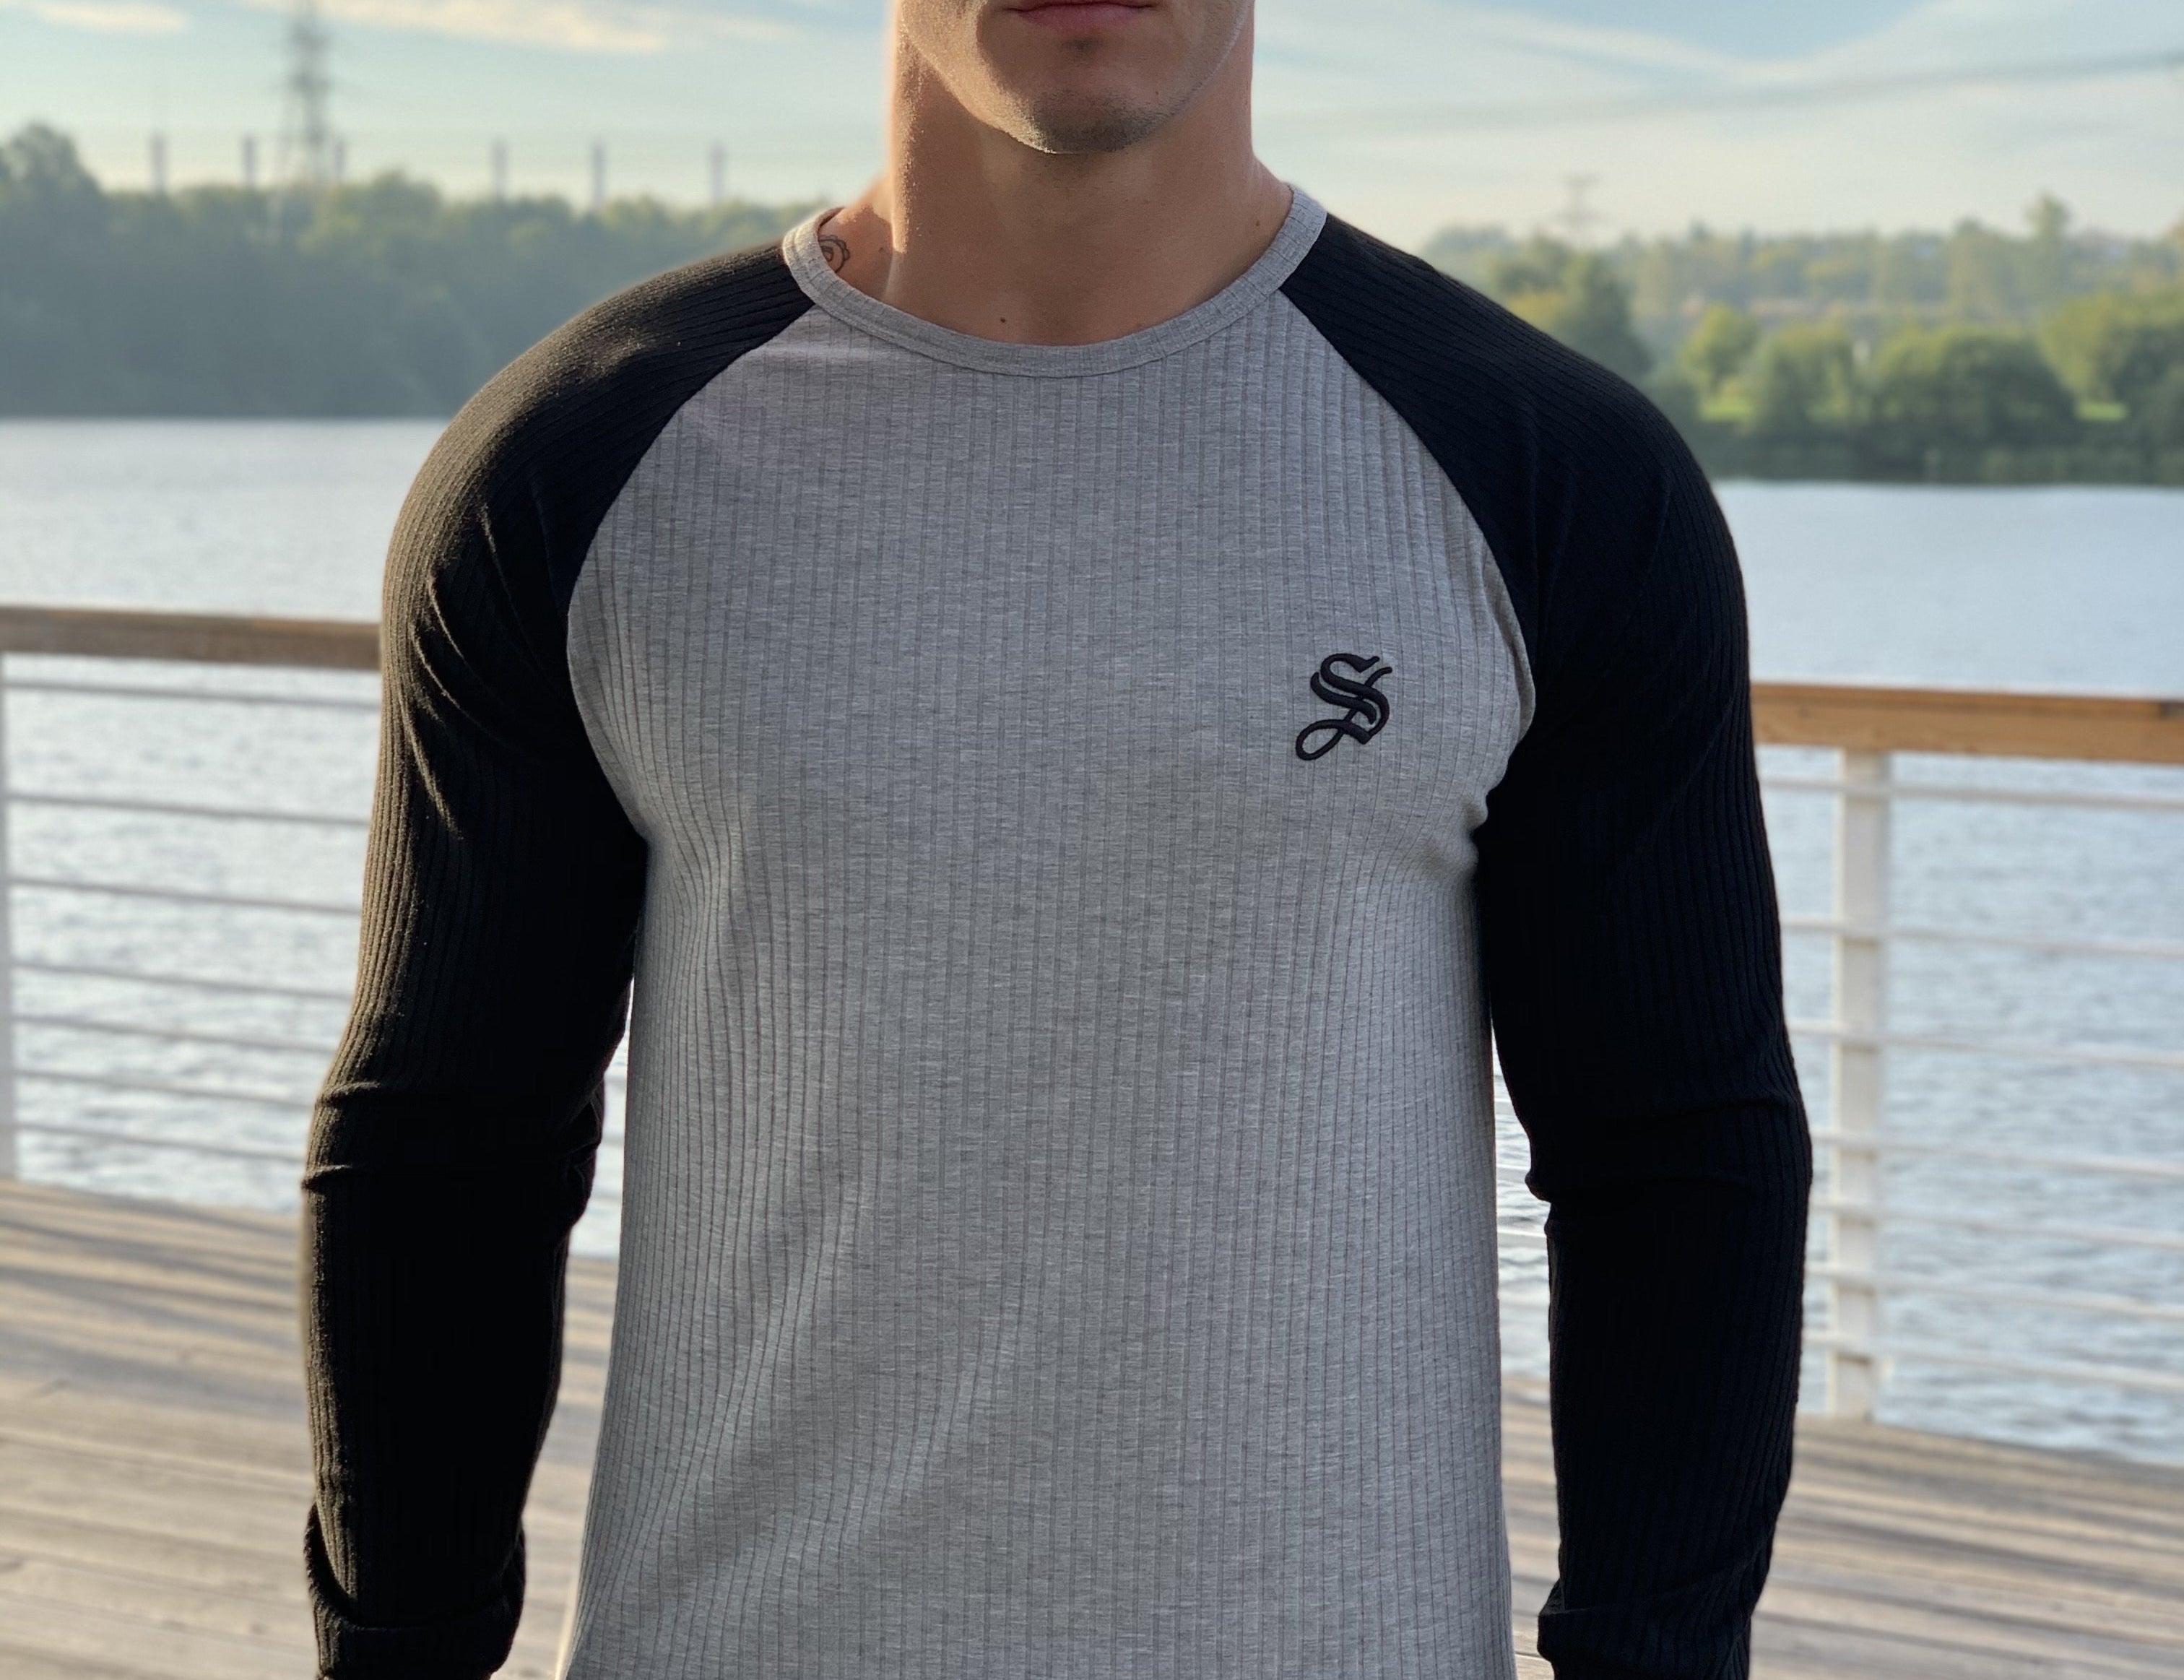 Resonance - Grey/Black Long Sleeve Shirt for Men (PRE-ORDER DISPATCH DATE 25 SEPTEMBER) - Sarman Fashion - Wholesale Clothing Fashion Brand for Men from Canada